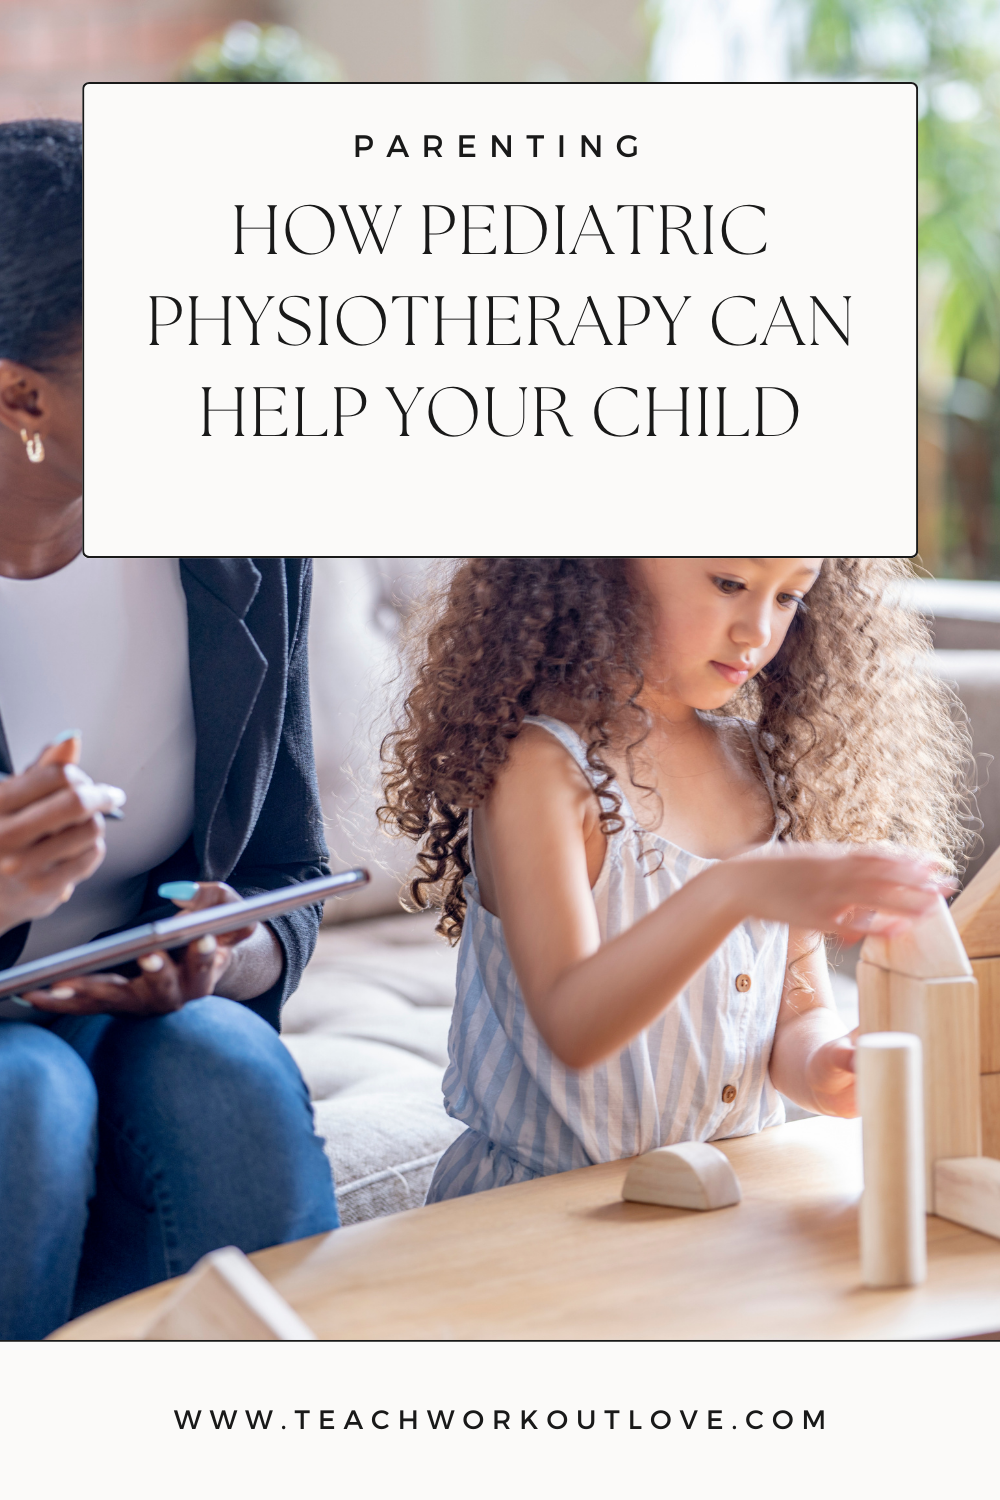 In this post, you’ll be able to understand how pediatric physiotherapy can benefit your child. Additionally, you can explore online for reliable sources to find out more about the conditions it can manage.